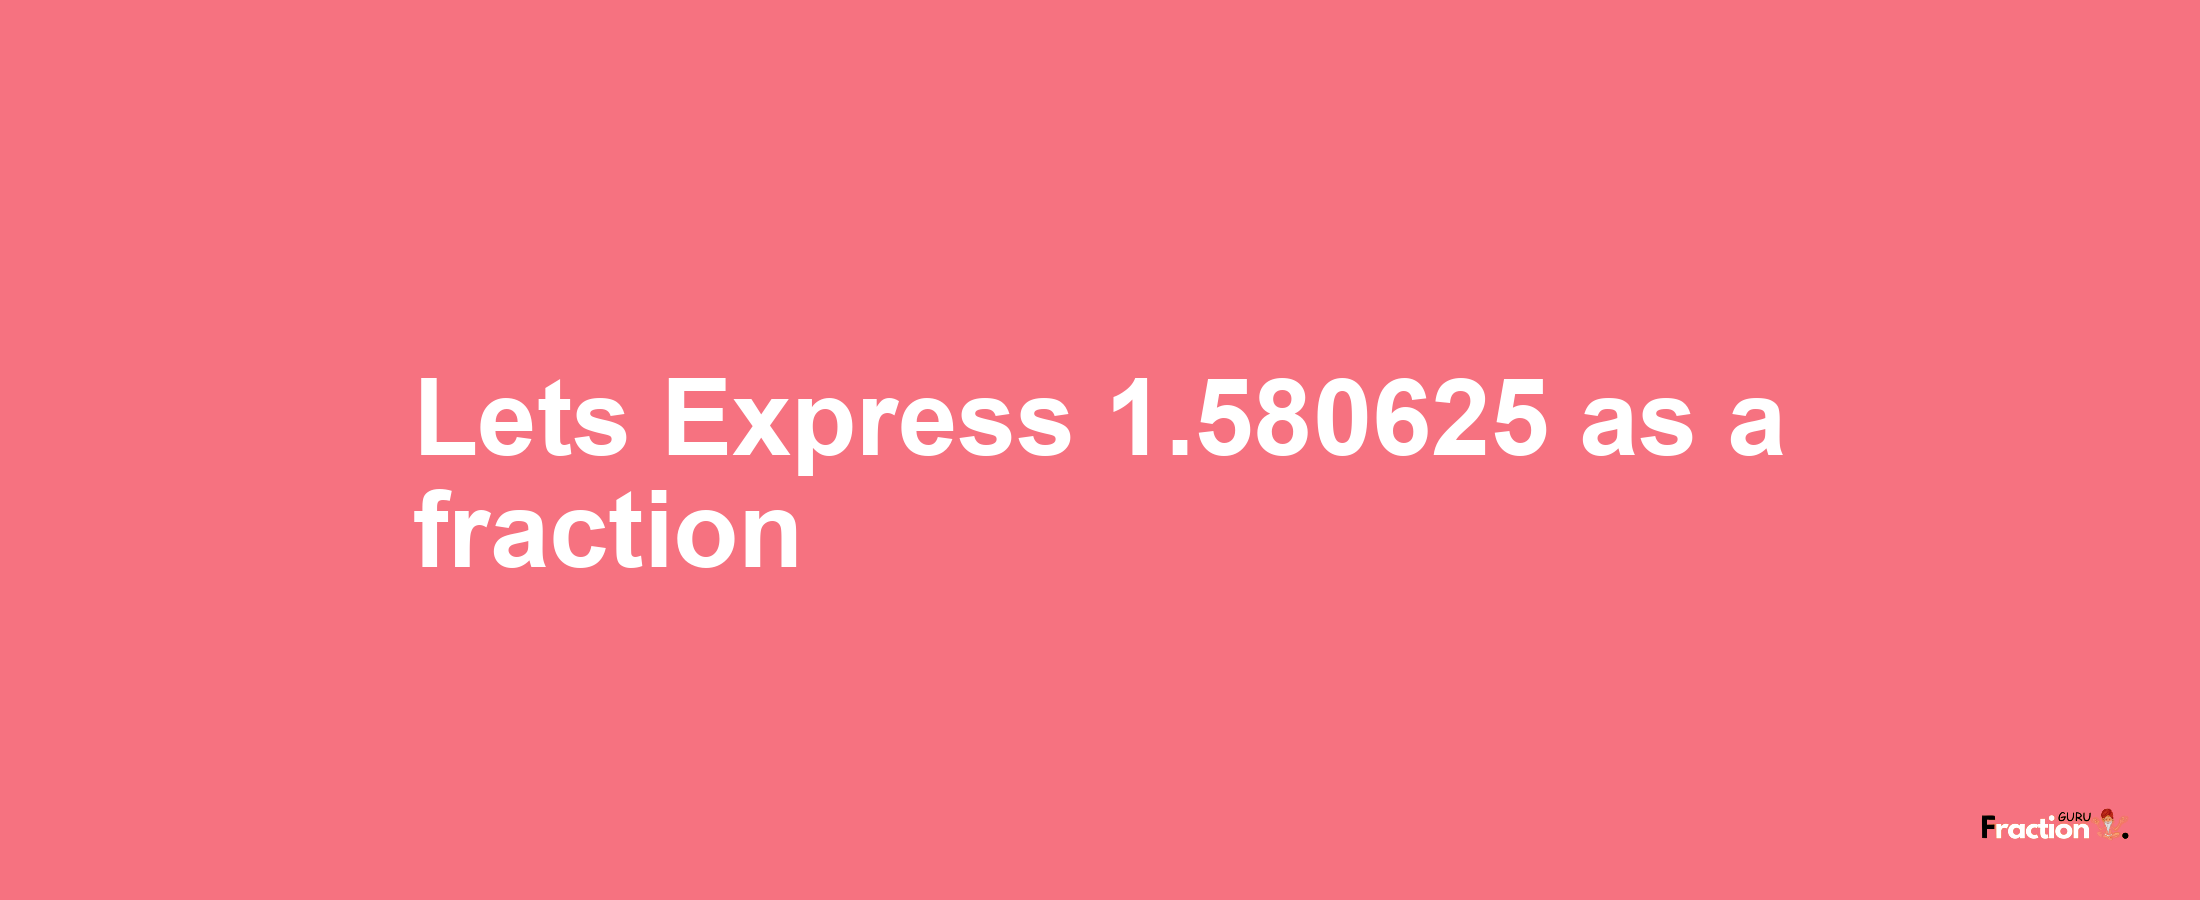 Lets Express 1.580625 as afraction